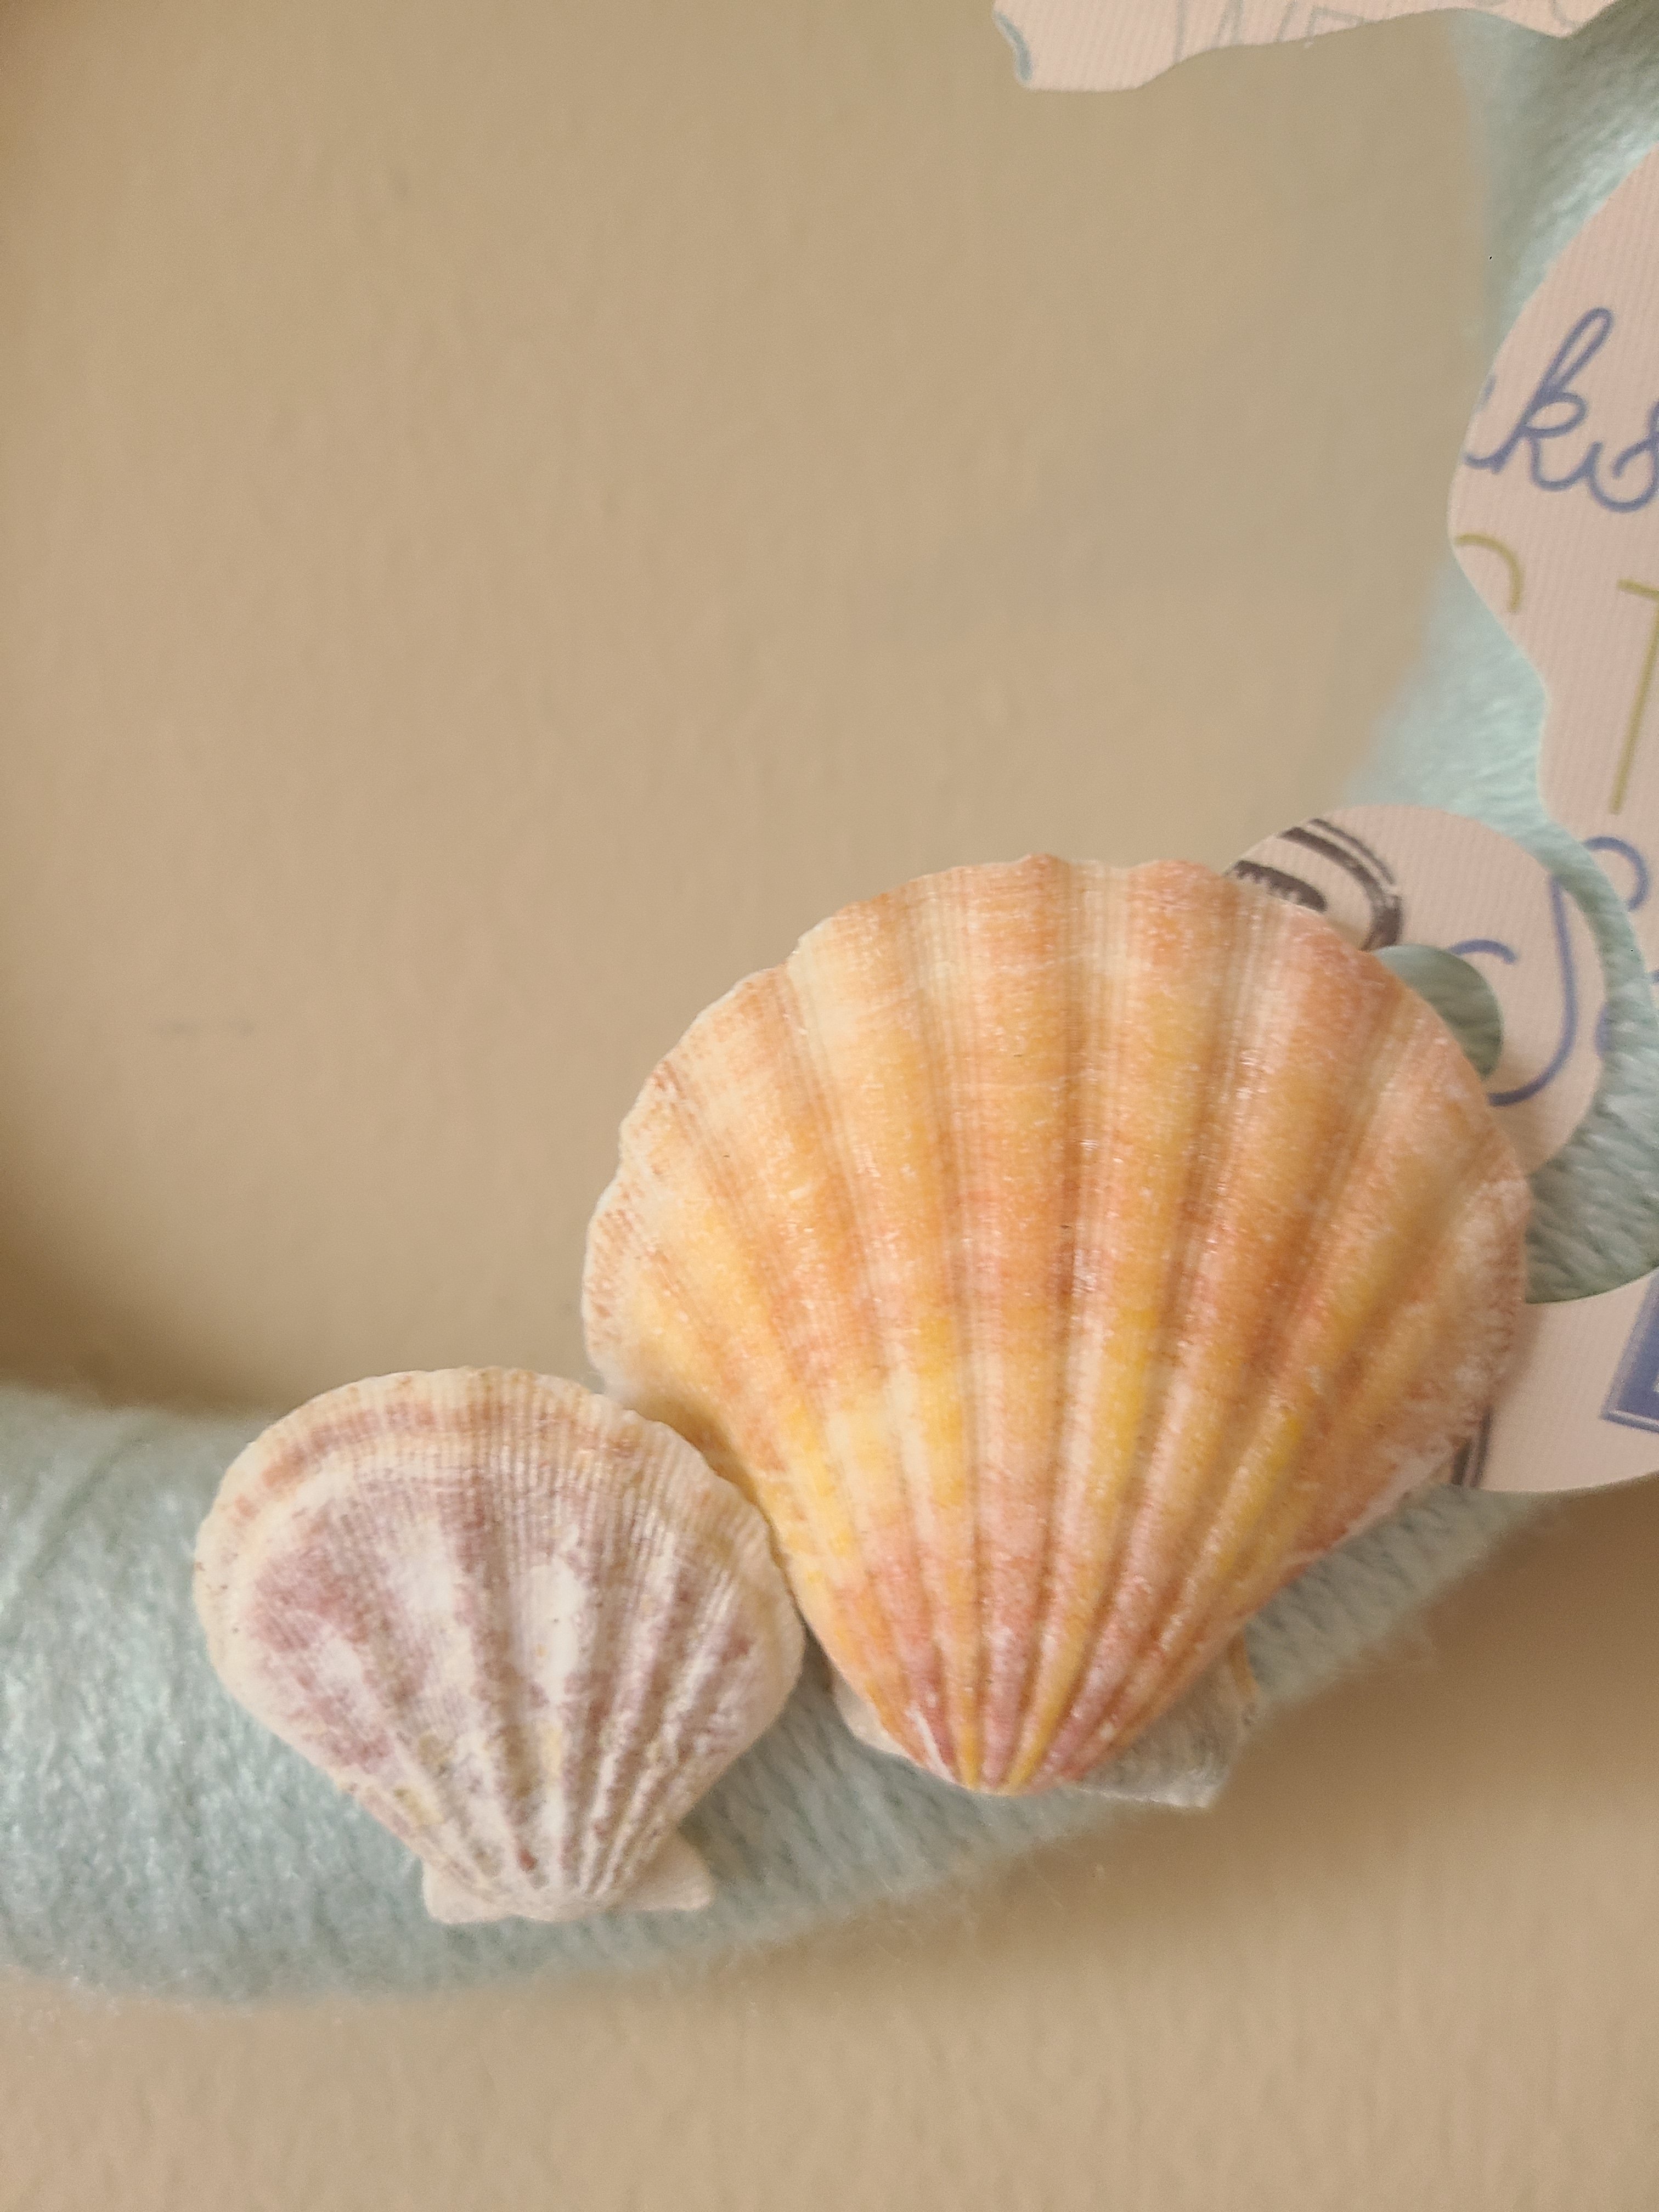 Two seashells glued next to the seahorse at the bottom of the beach yarn wreath.